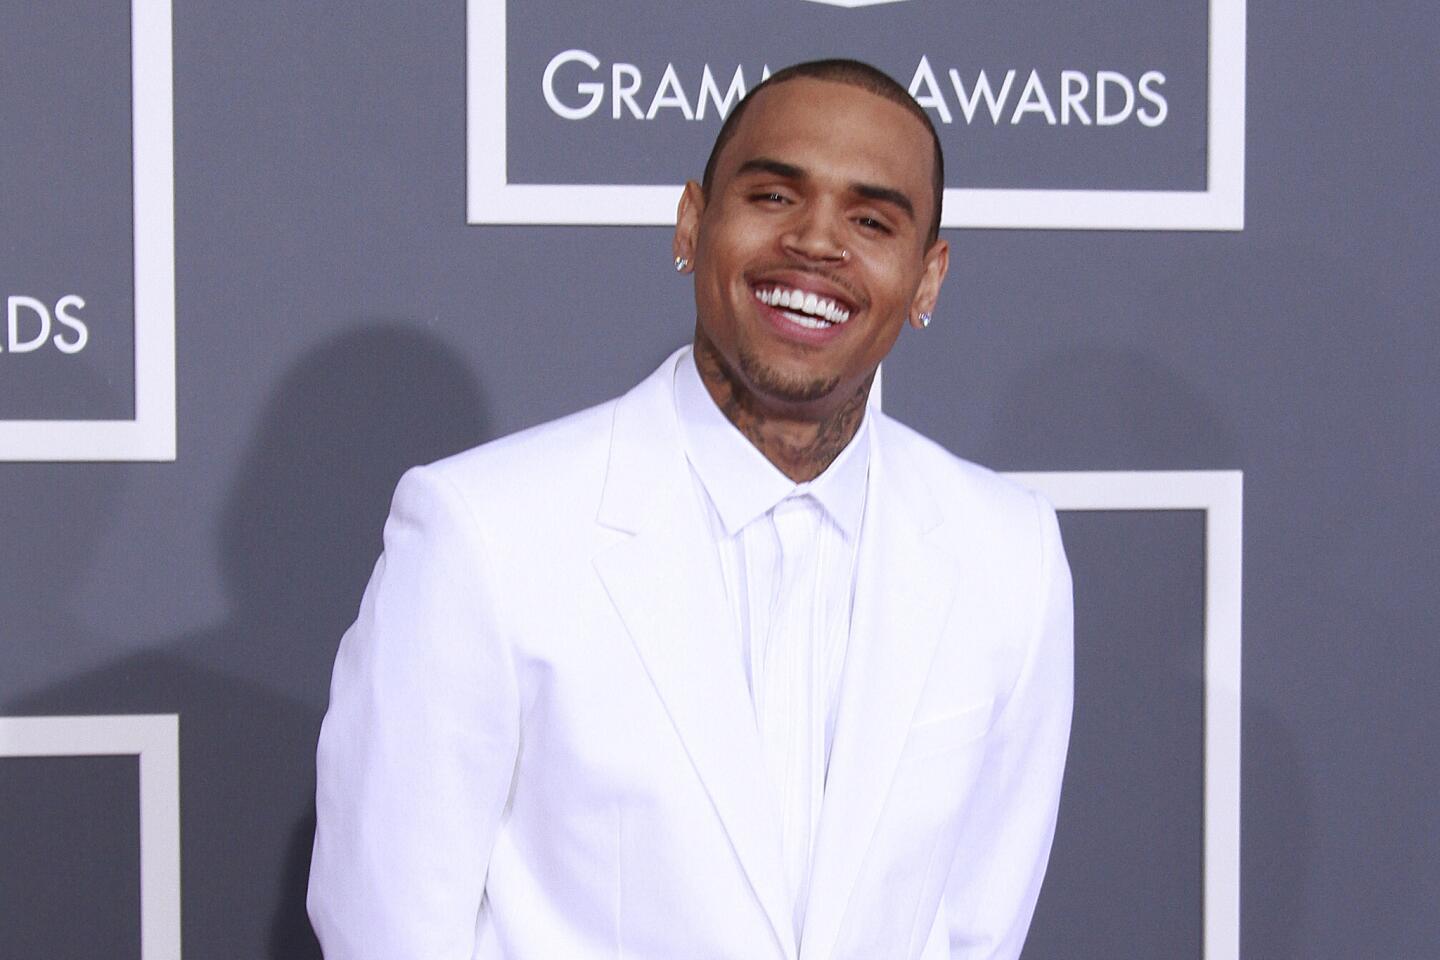 Chris Brown's name evokes controversy these days, so it's easy to forget that he once had a role model image. From high school crooner to R&B star both idolized and vilified, here's a brief look at Chris Brown's life and career. Pictured: Chris Brown at the Grammy Awards in 2013.